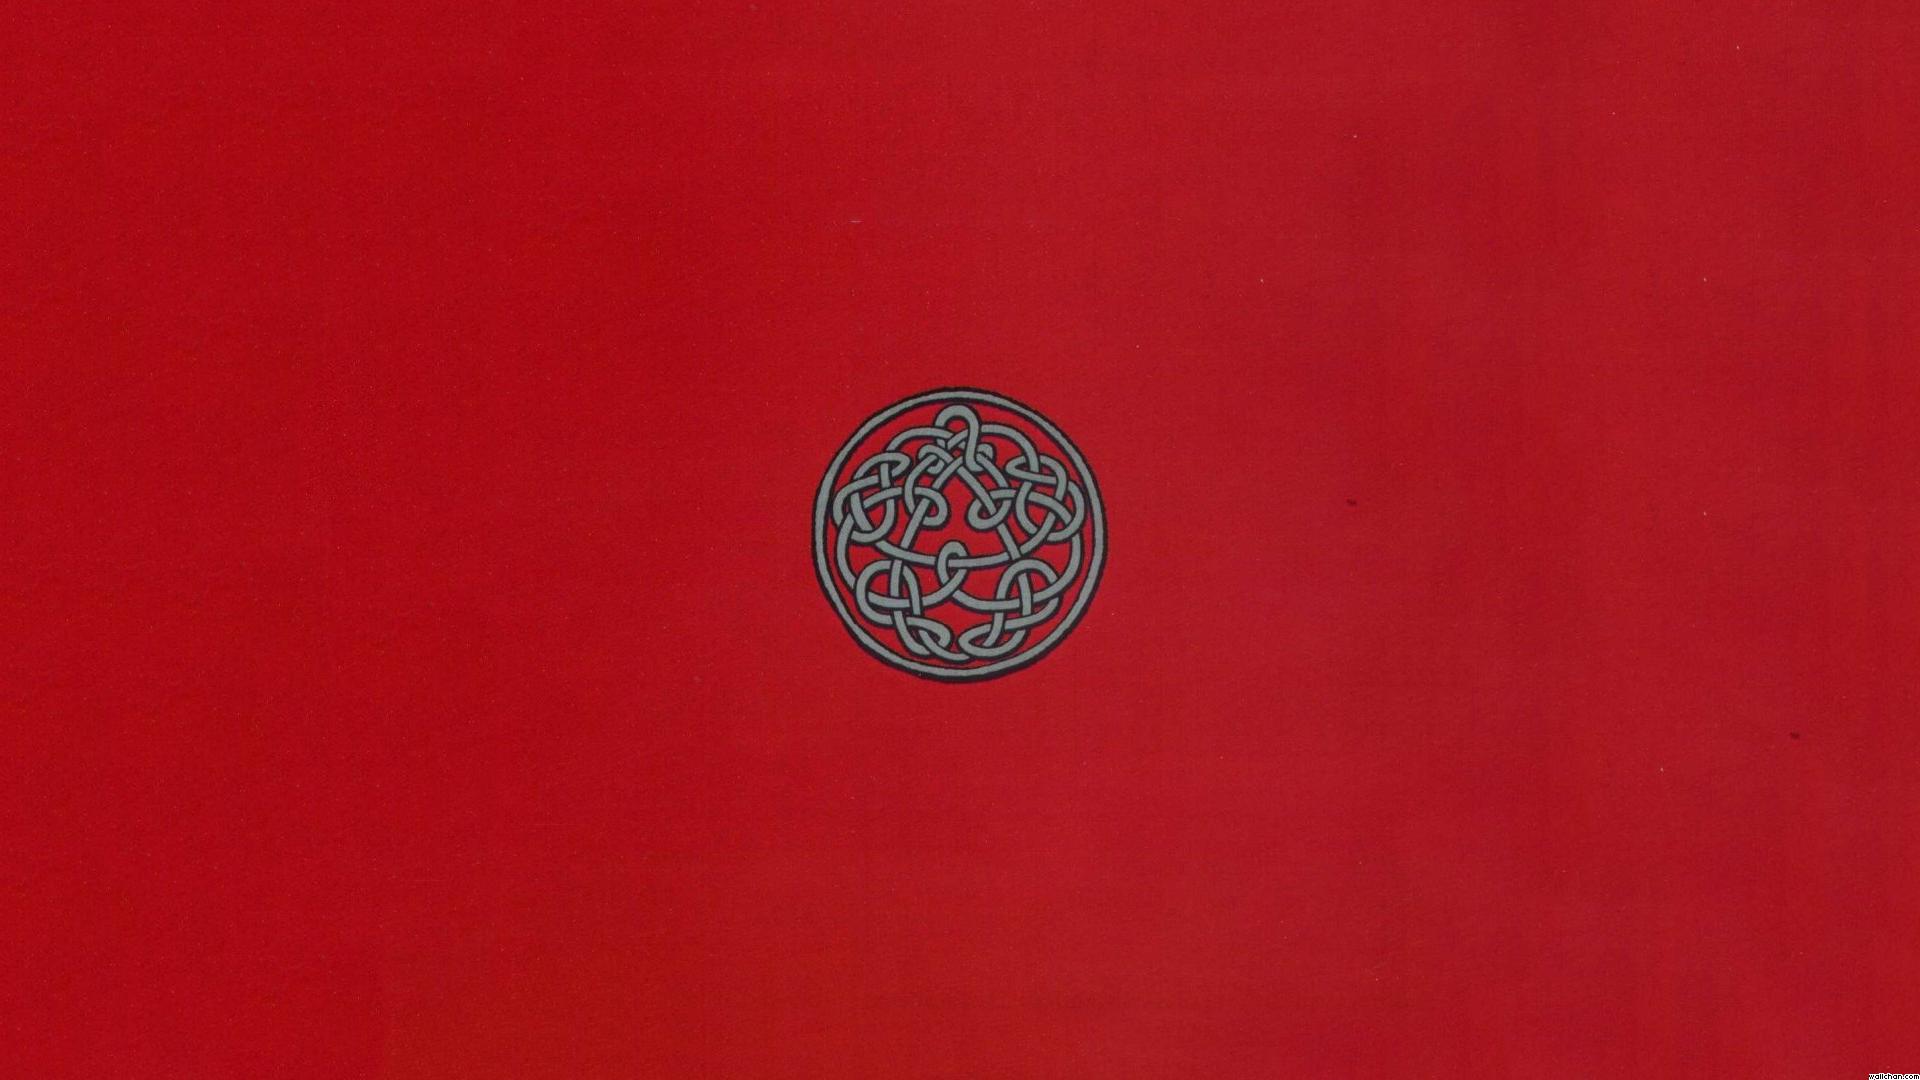 I made a king crimson wallpaper for the iPhone because of how much I love  it feel free to download it crimson fans  rKingCrimson